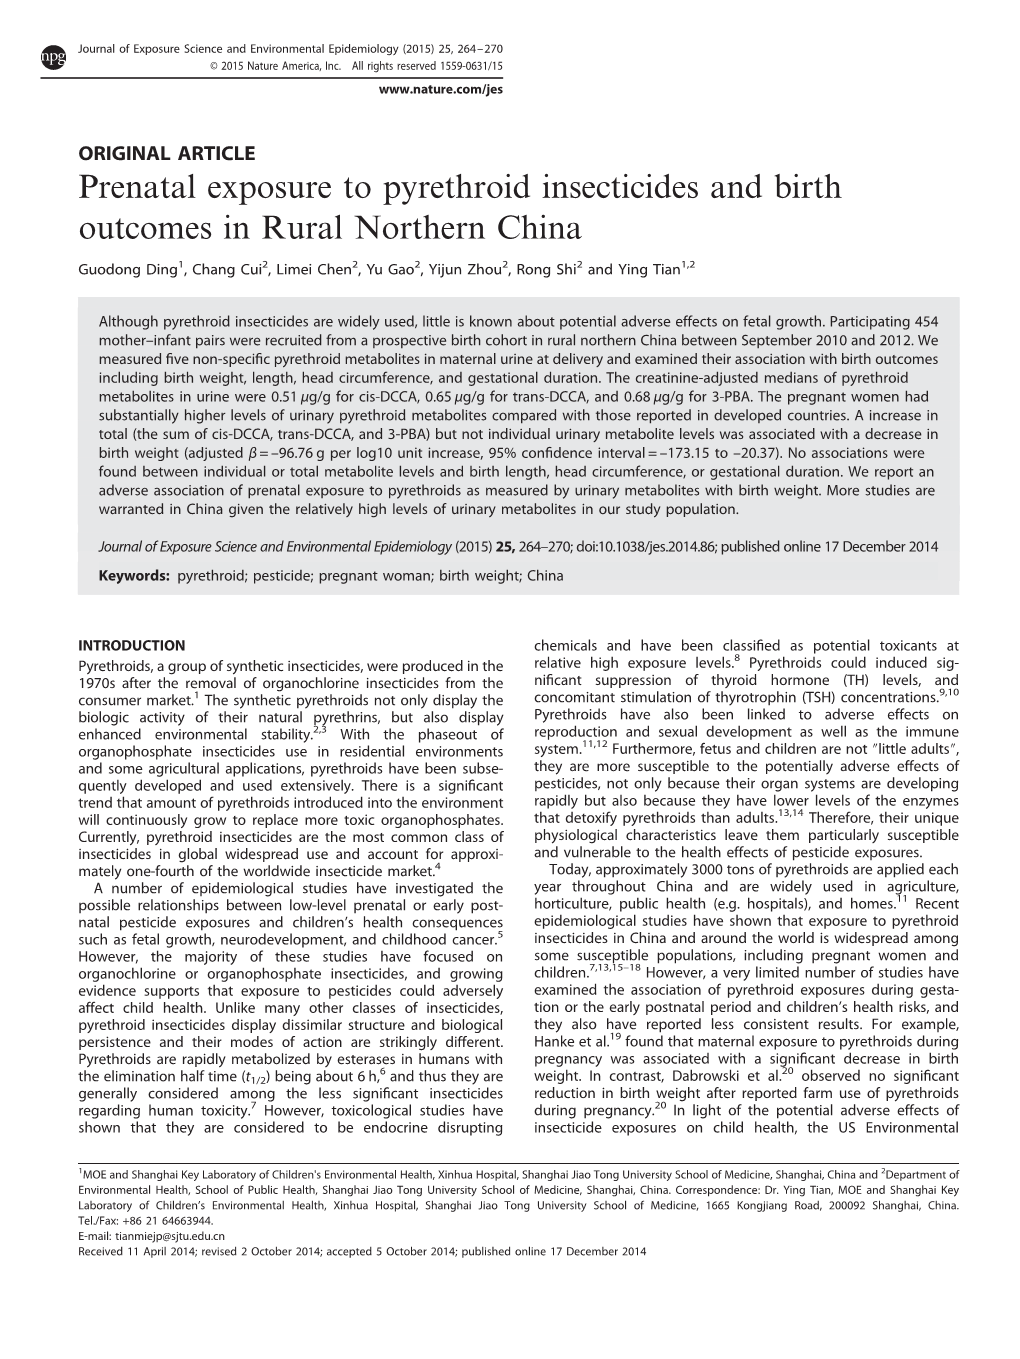 Prenatal Exposure to Pyrethroid Insecticides and Birth Outcomes in Rural Northern China